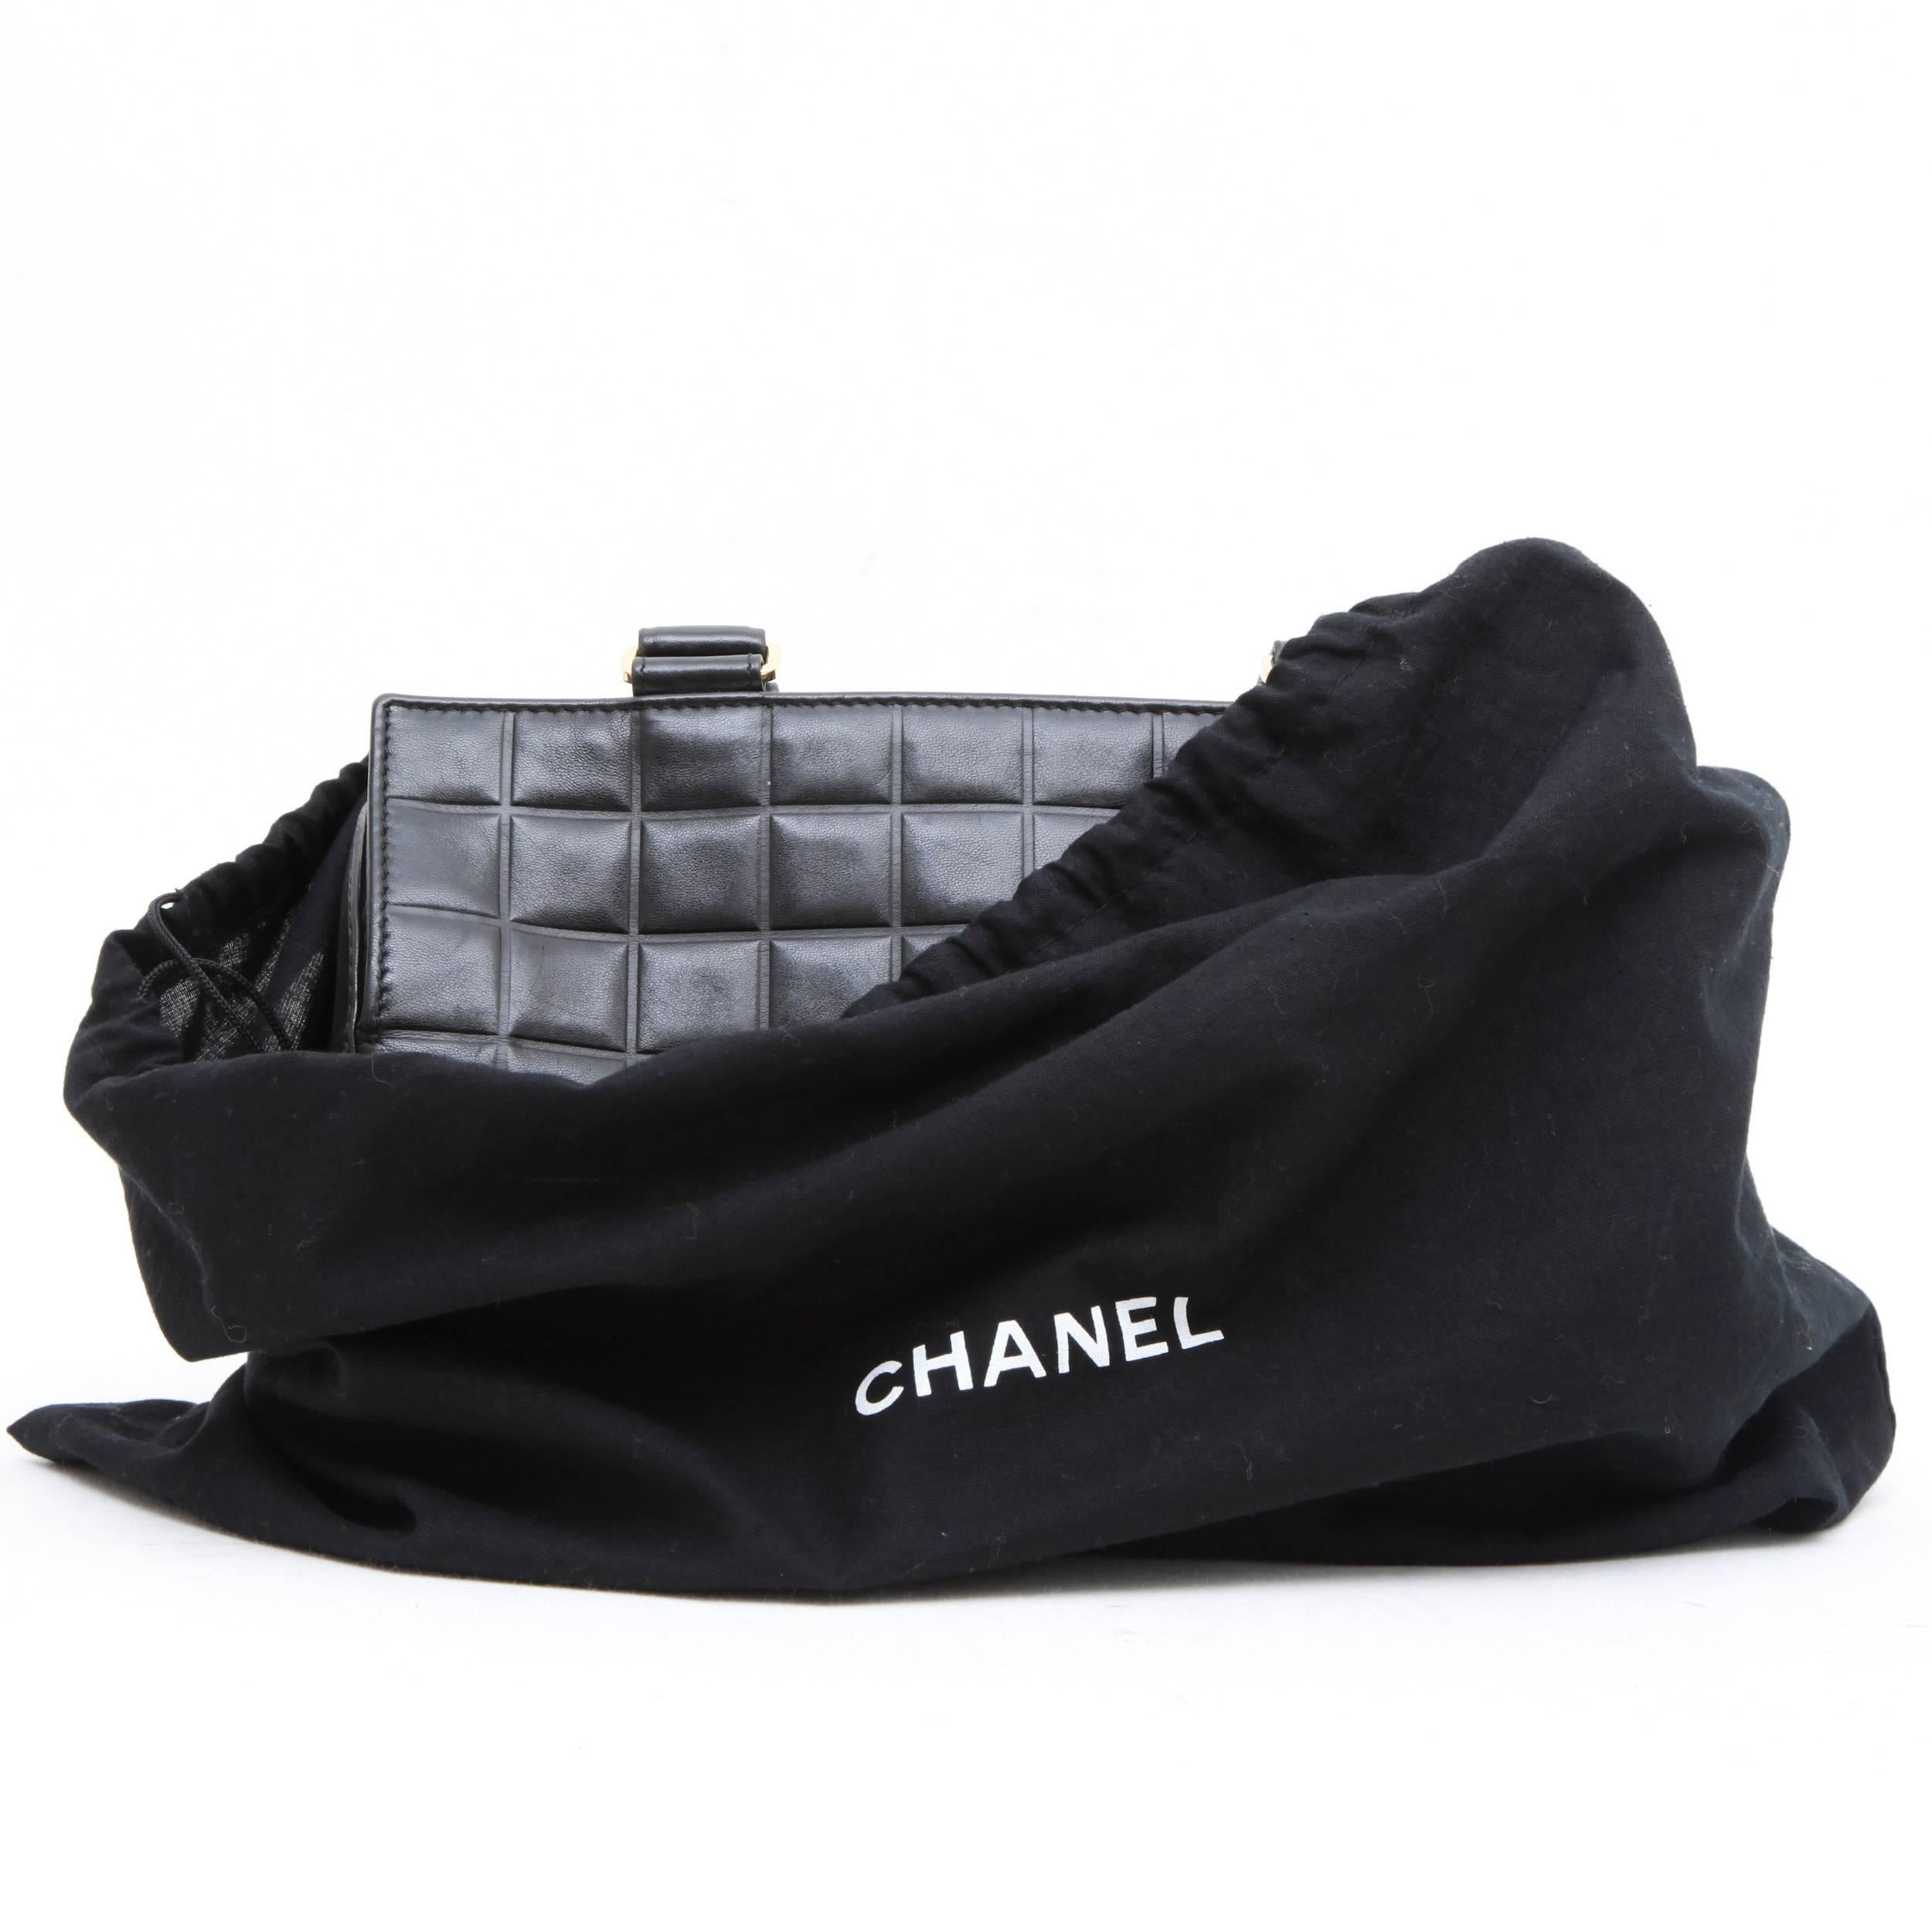 CHANEL Bag in Black Quilted Smooth Lamb Leather 5